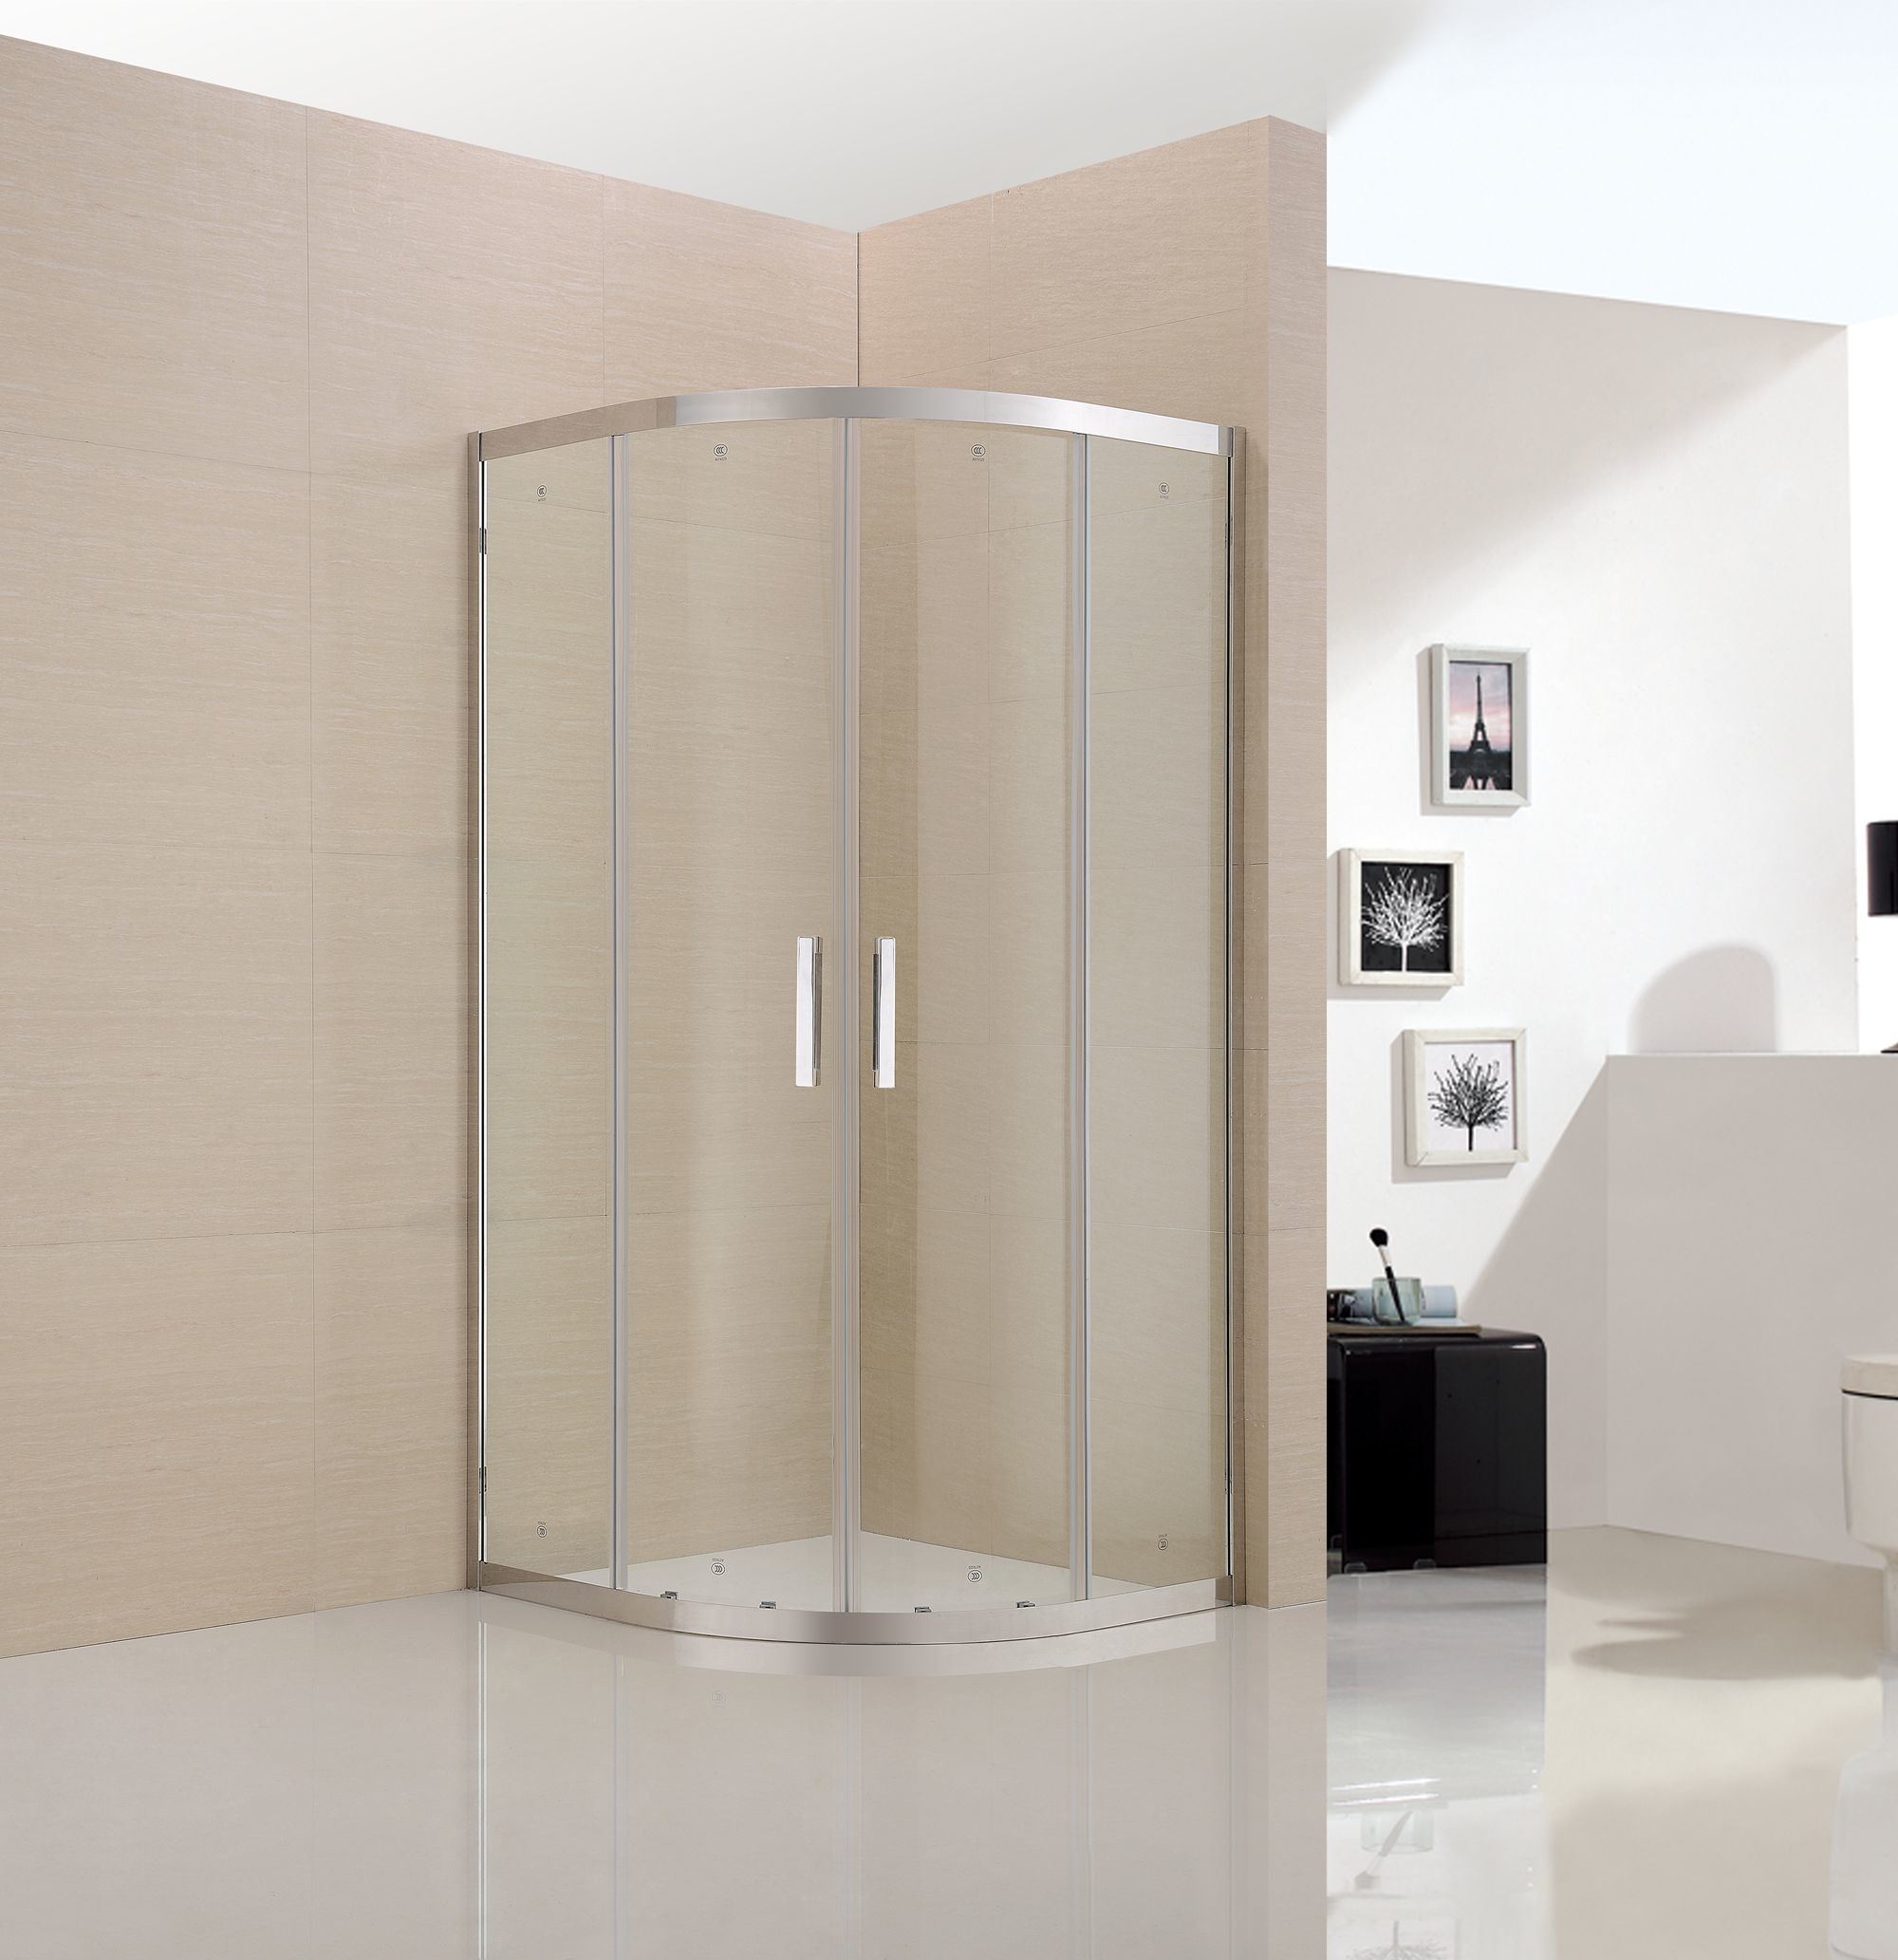 SUS Sector Profile Shower Cubicle / Shower Room Cabin